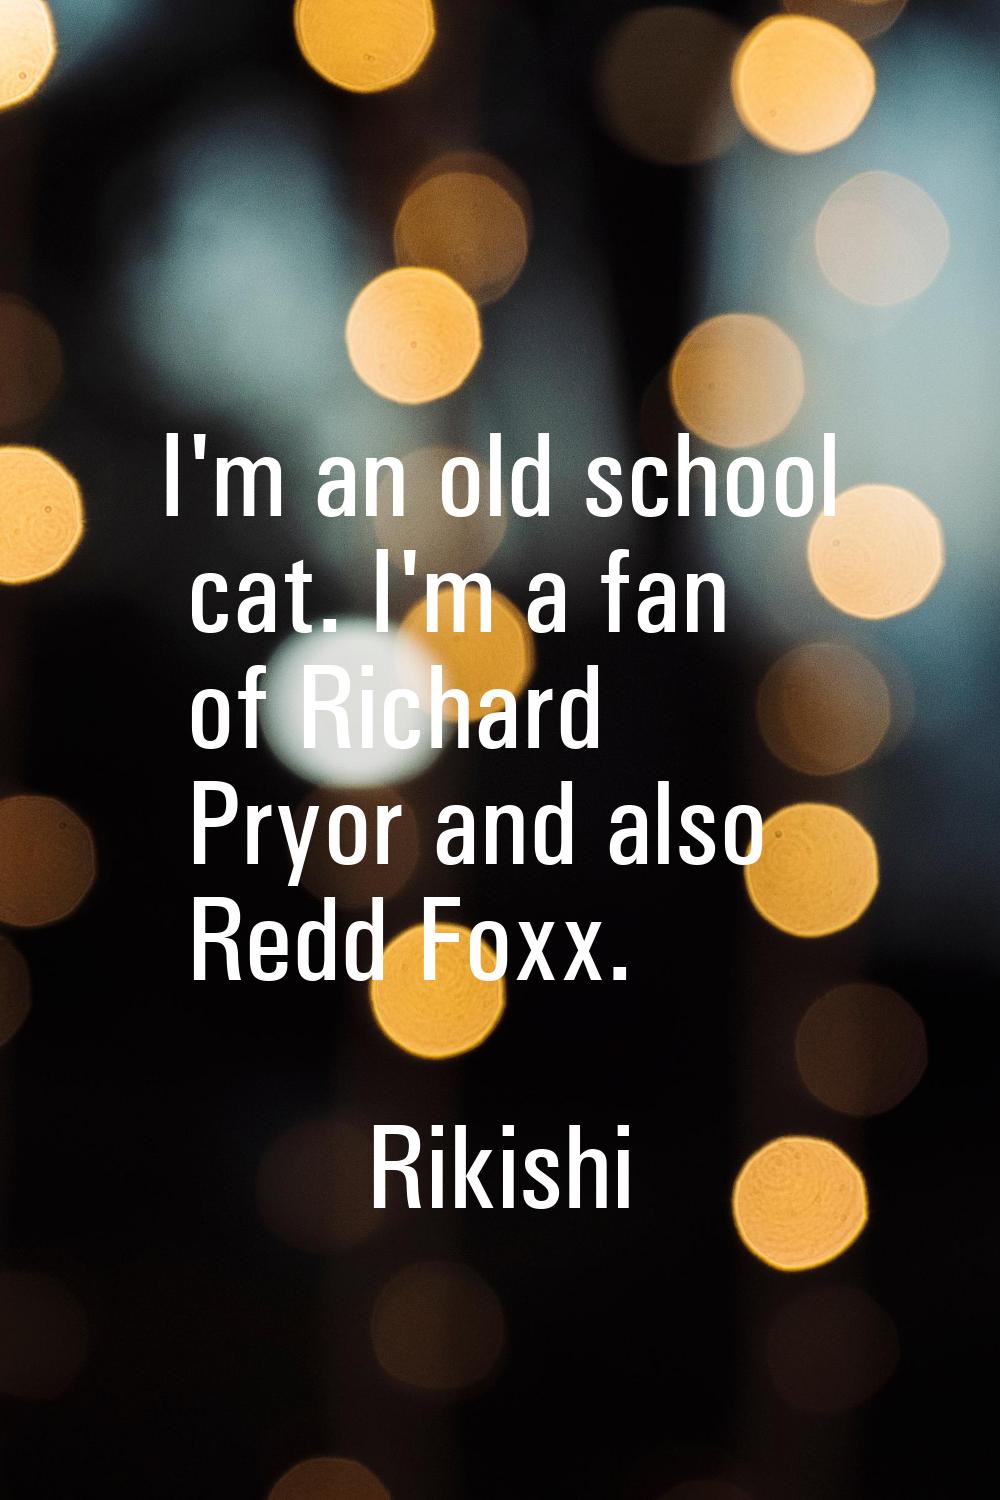 I'm an old school cat. I'm a fan of Richard Pryor and also Redd Foxx.